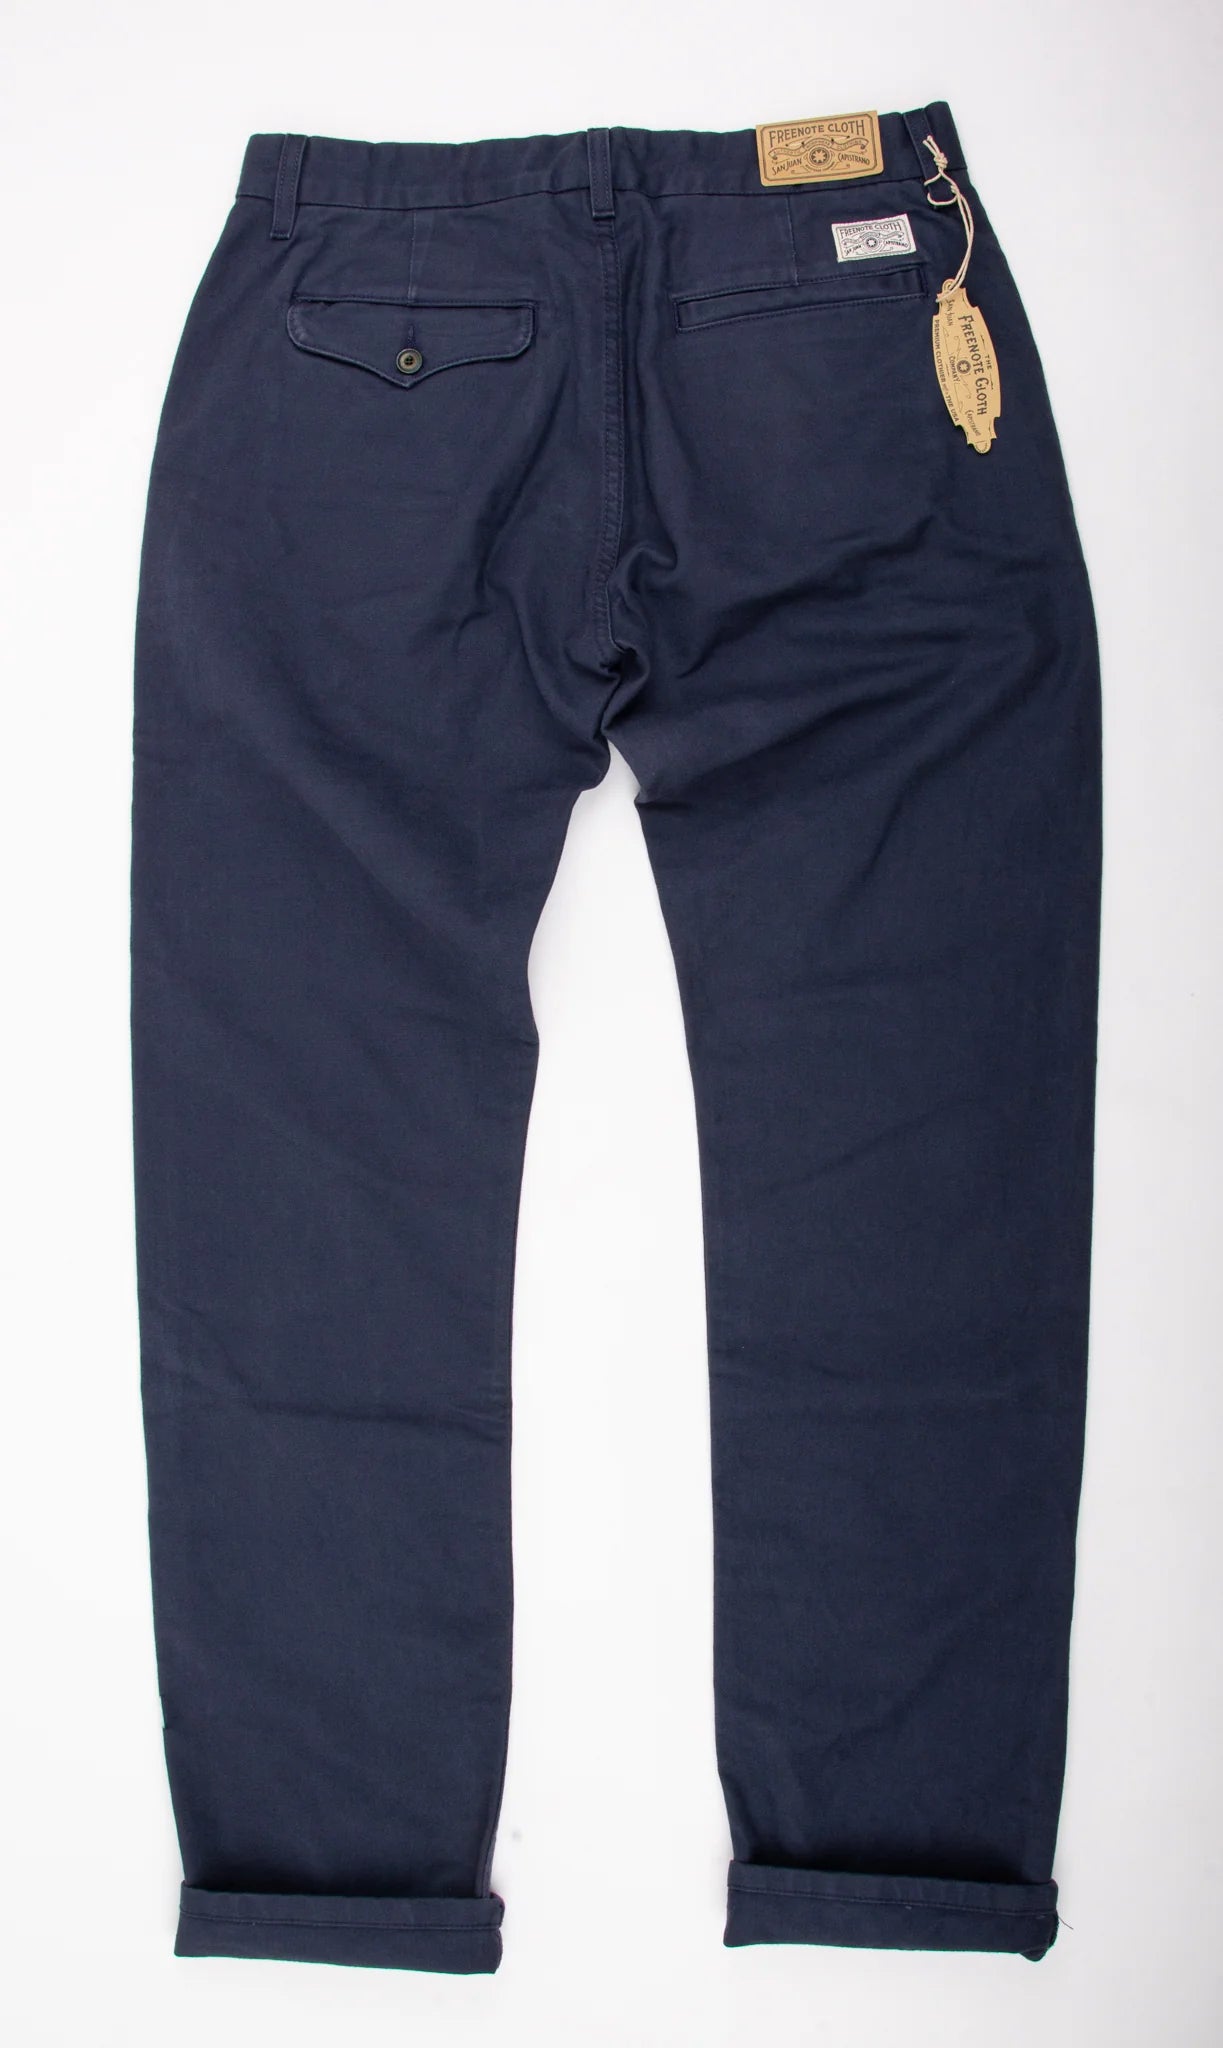 Freenote Cloth Workers Chino Slim Fit - Navy